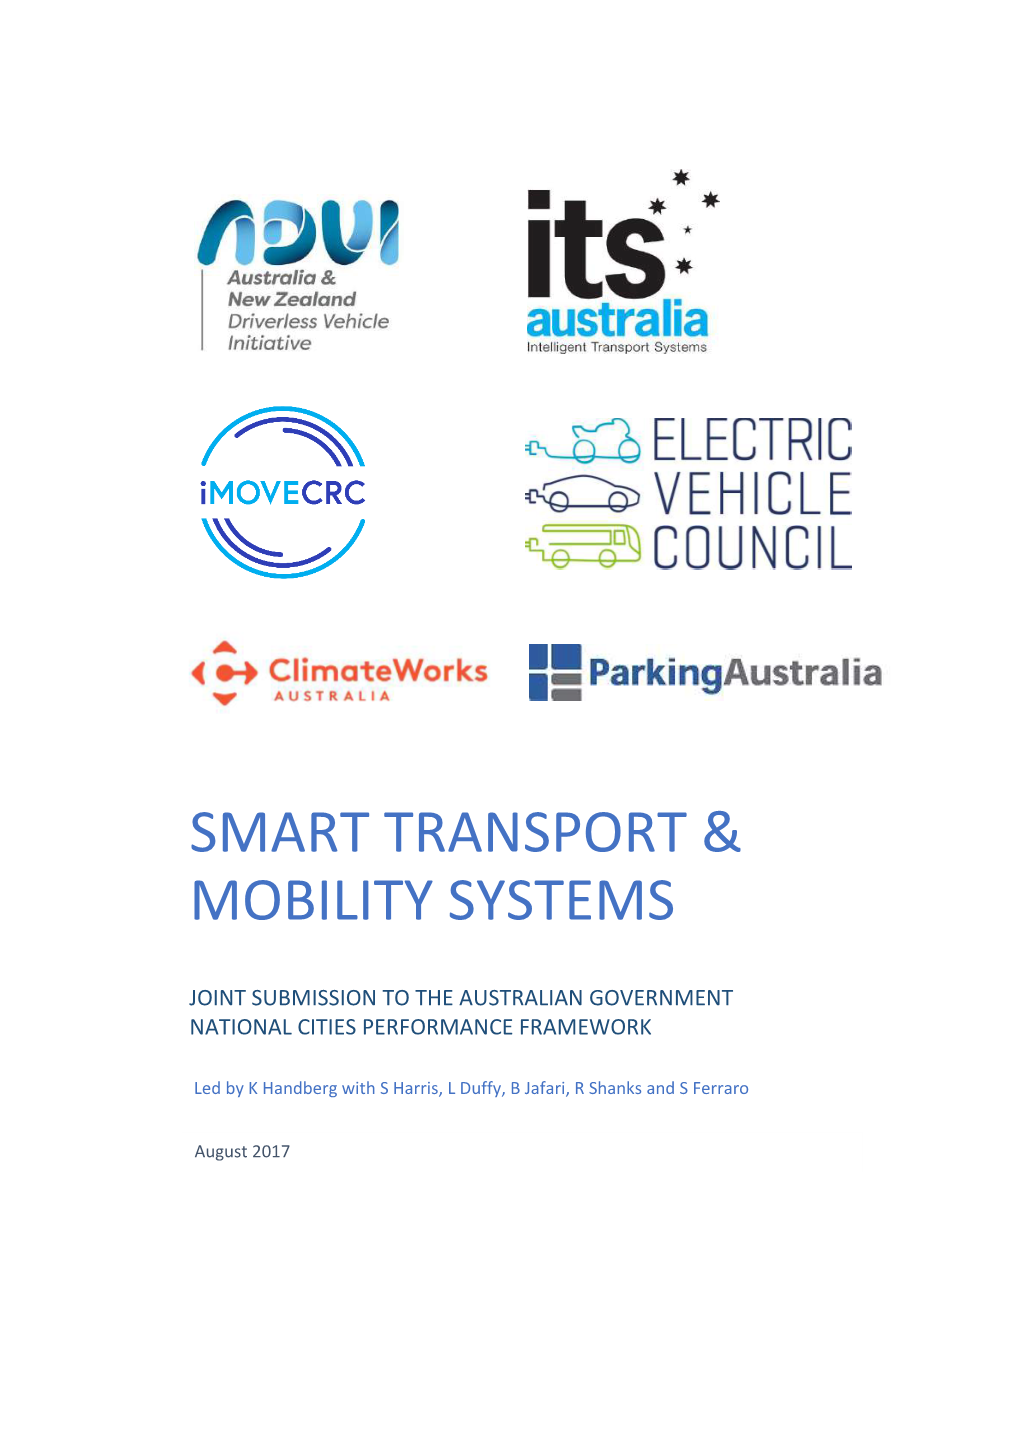 Smart Transport & Mobility Systems